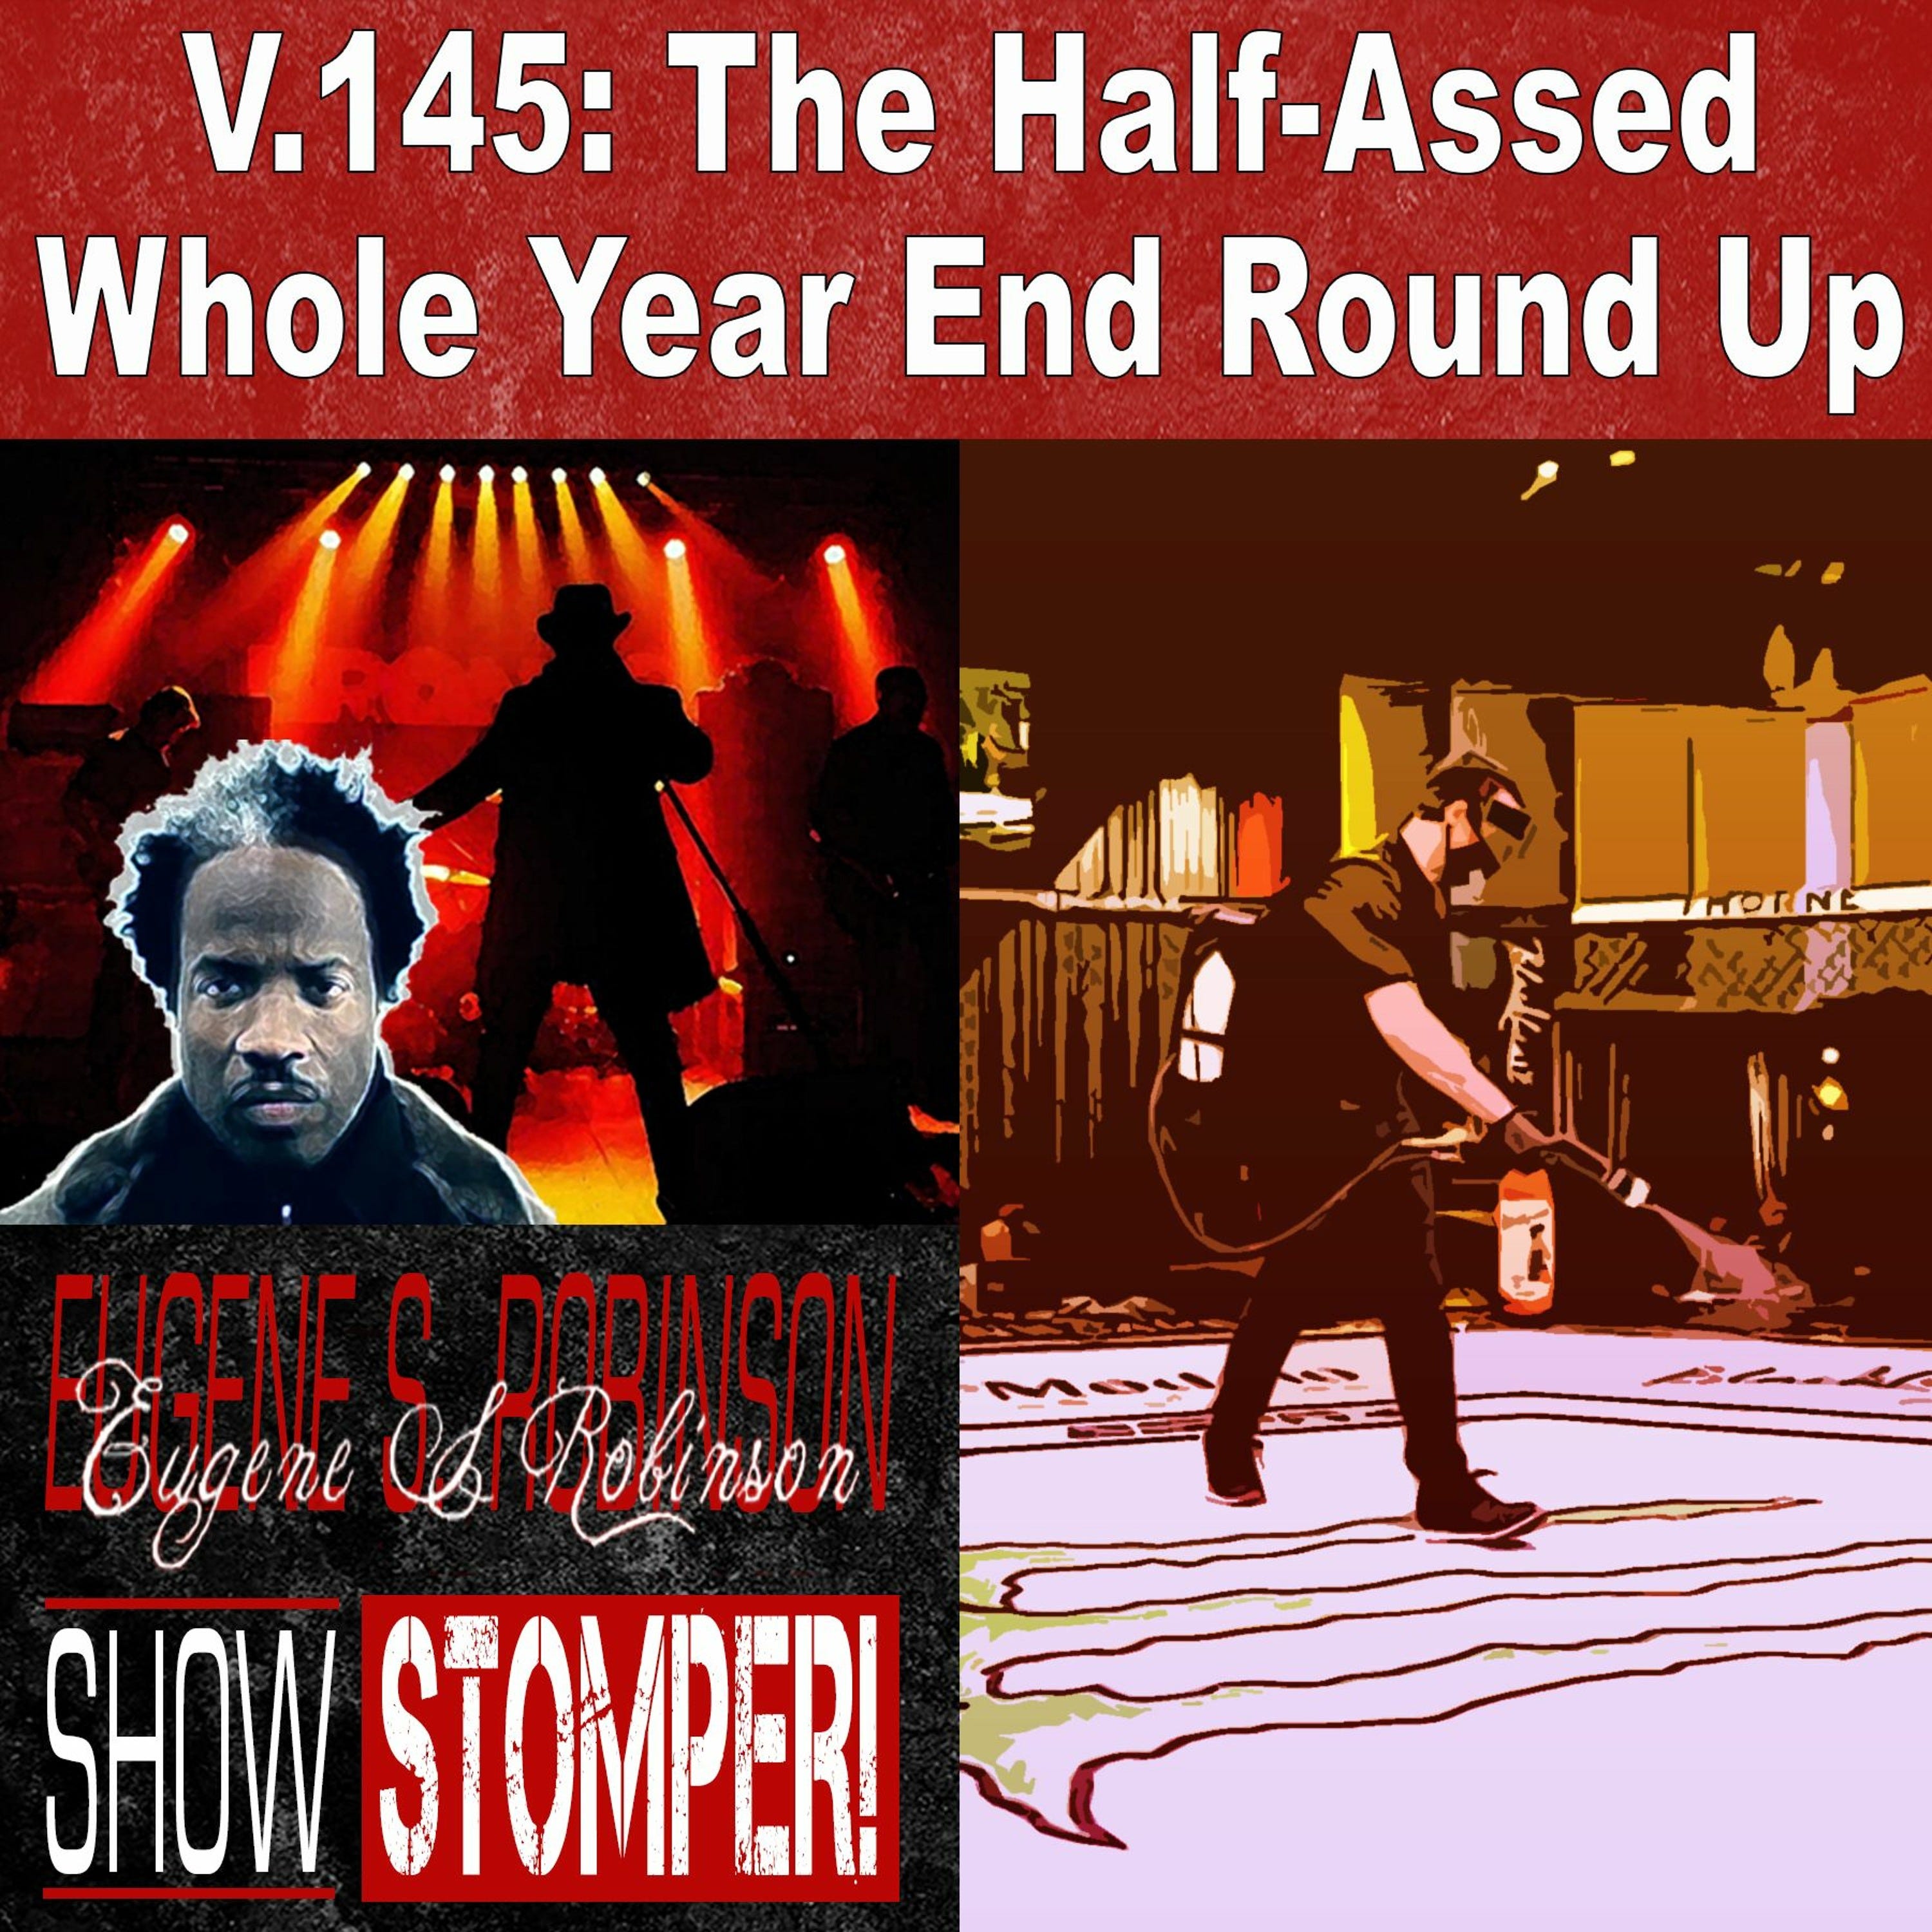 V.145 The Half - Assed Whole Year End Round Up On The Eugene S. Robinson Show Stomper!